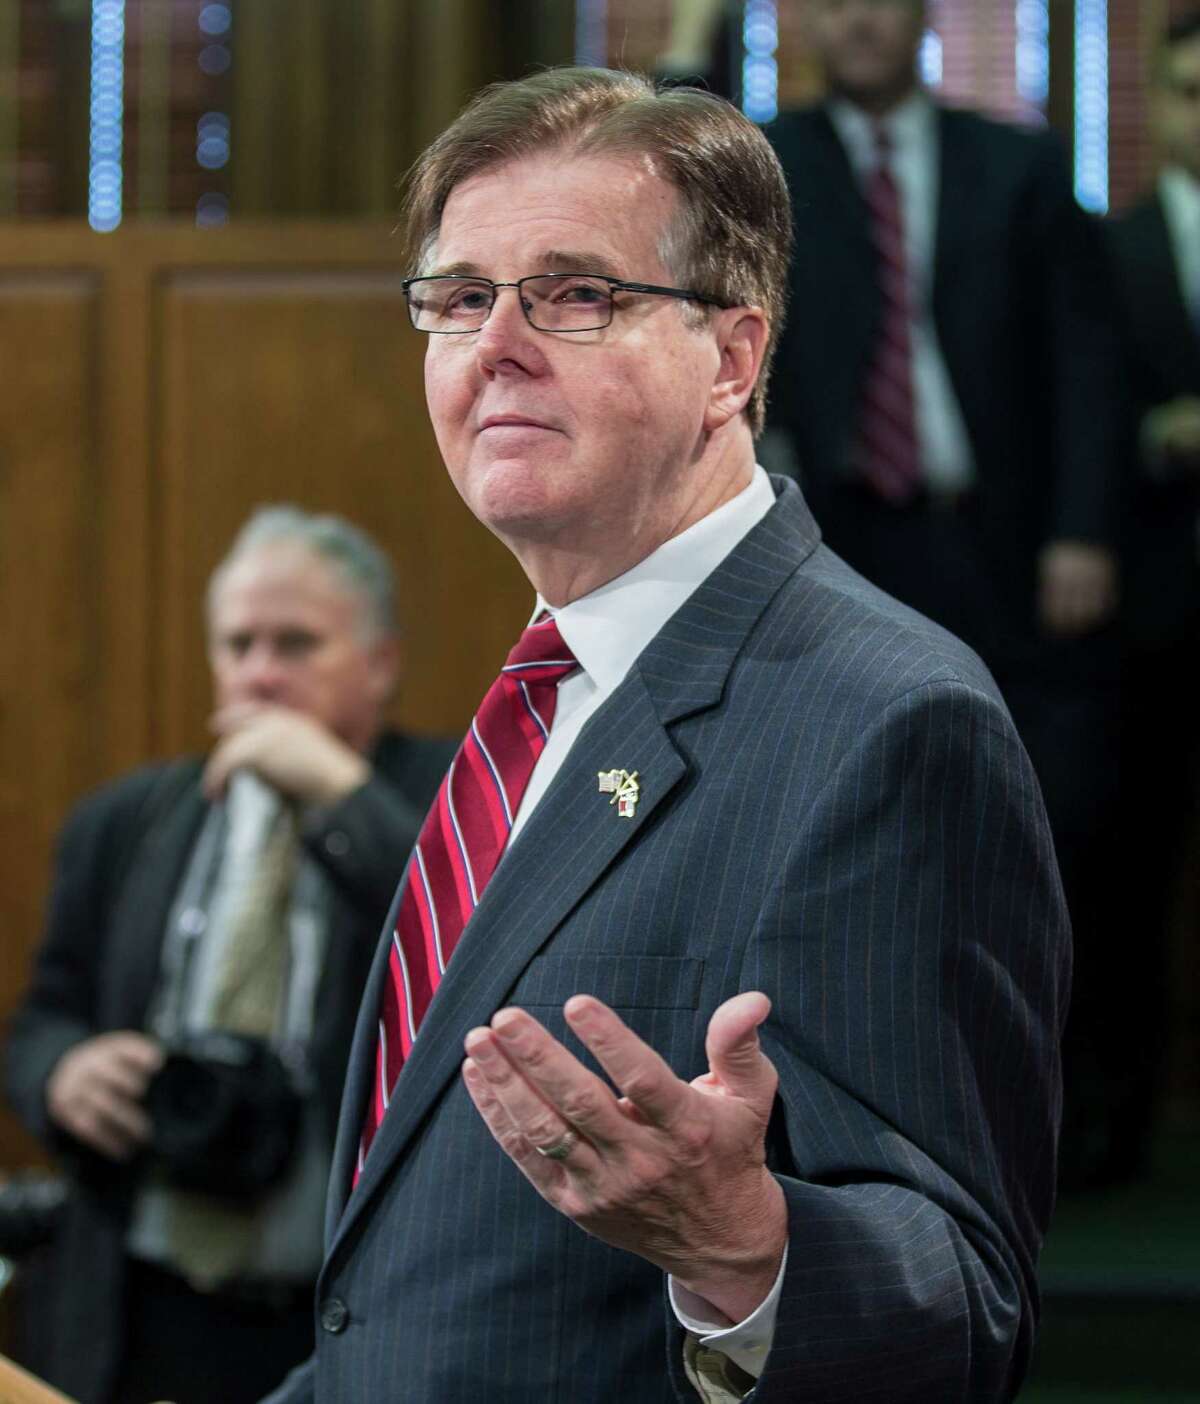 Lt. Gov. Dan Patrick, who leads the Senate, received $125,000 from the Kickapoos during his campaign for the post.